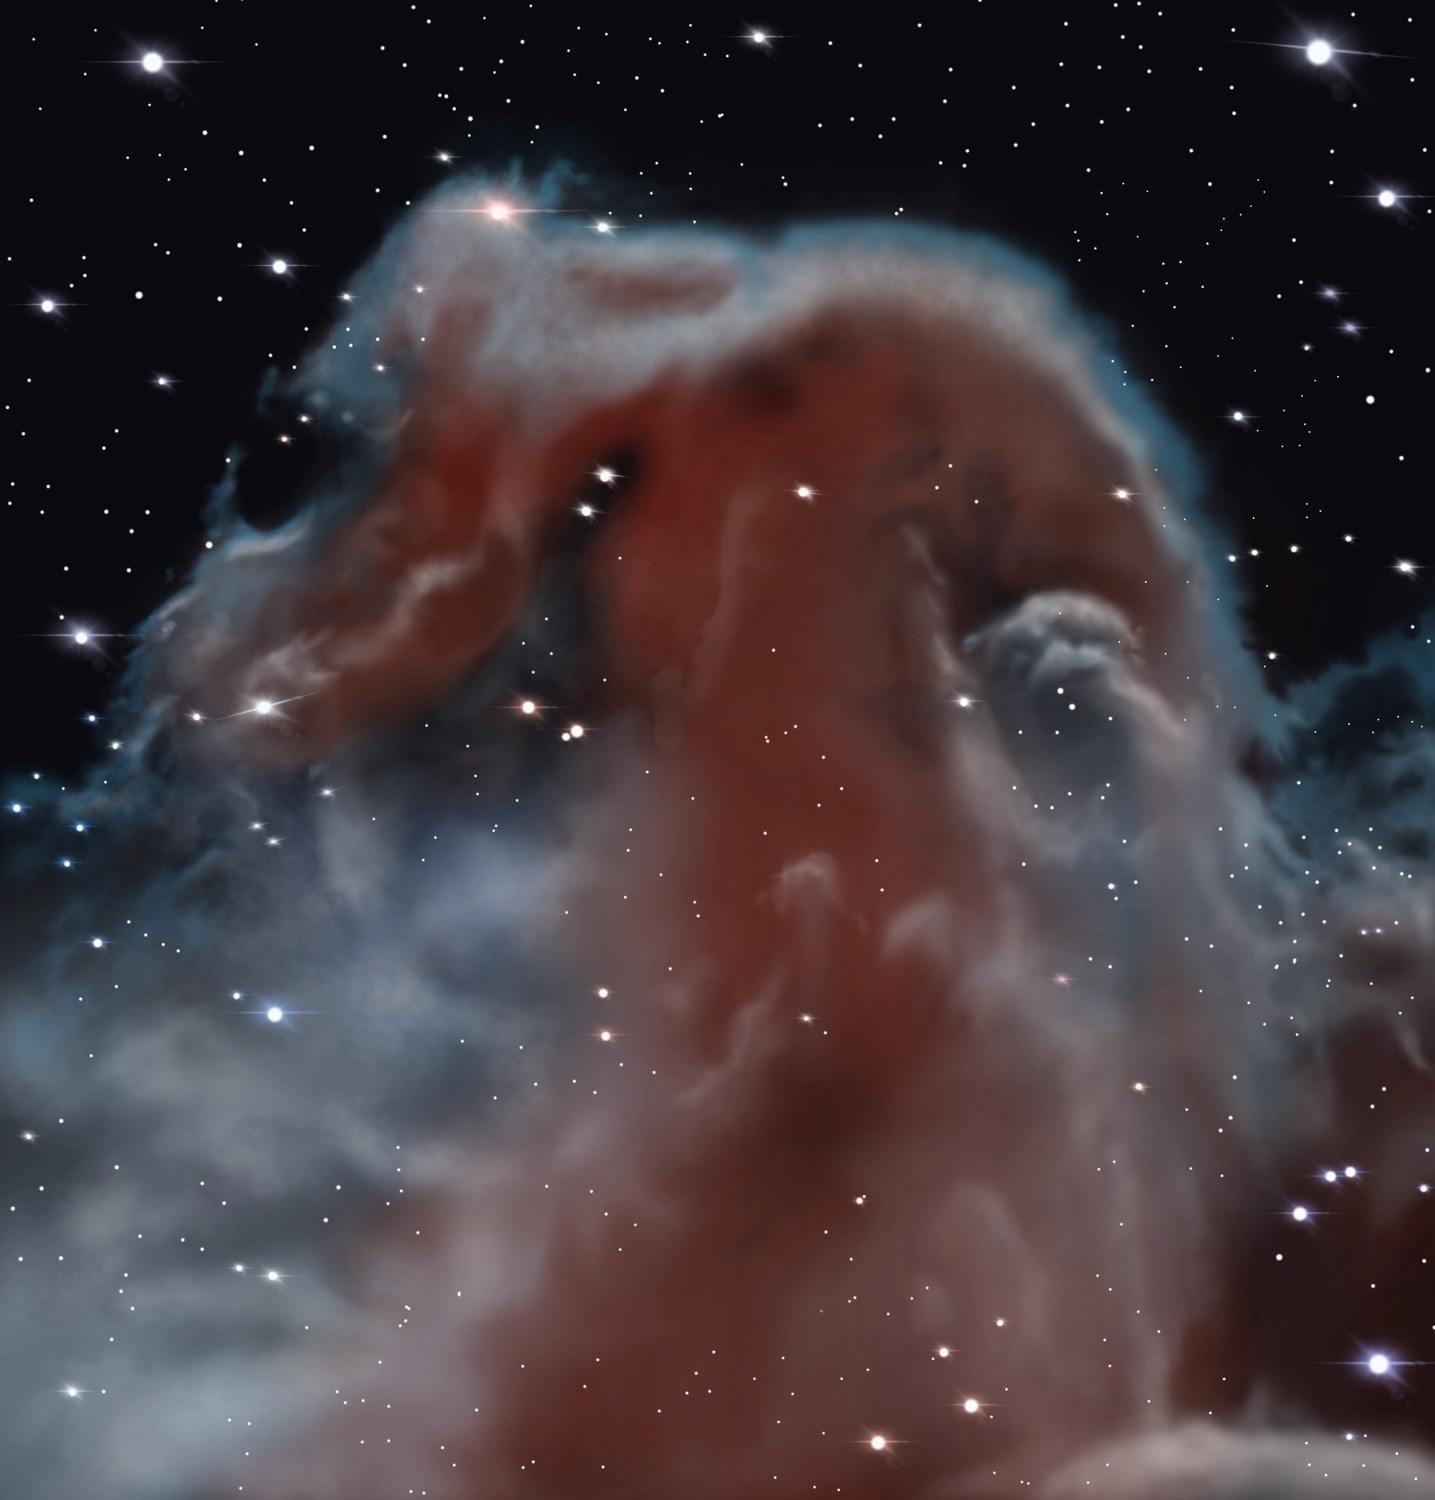 A painting of the Horsehead Nebula. The nebula is a cloudy mass of white and pinkish gas and dust in the shape of a horse head set against a starfield